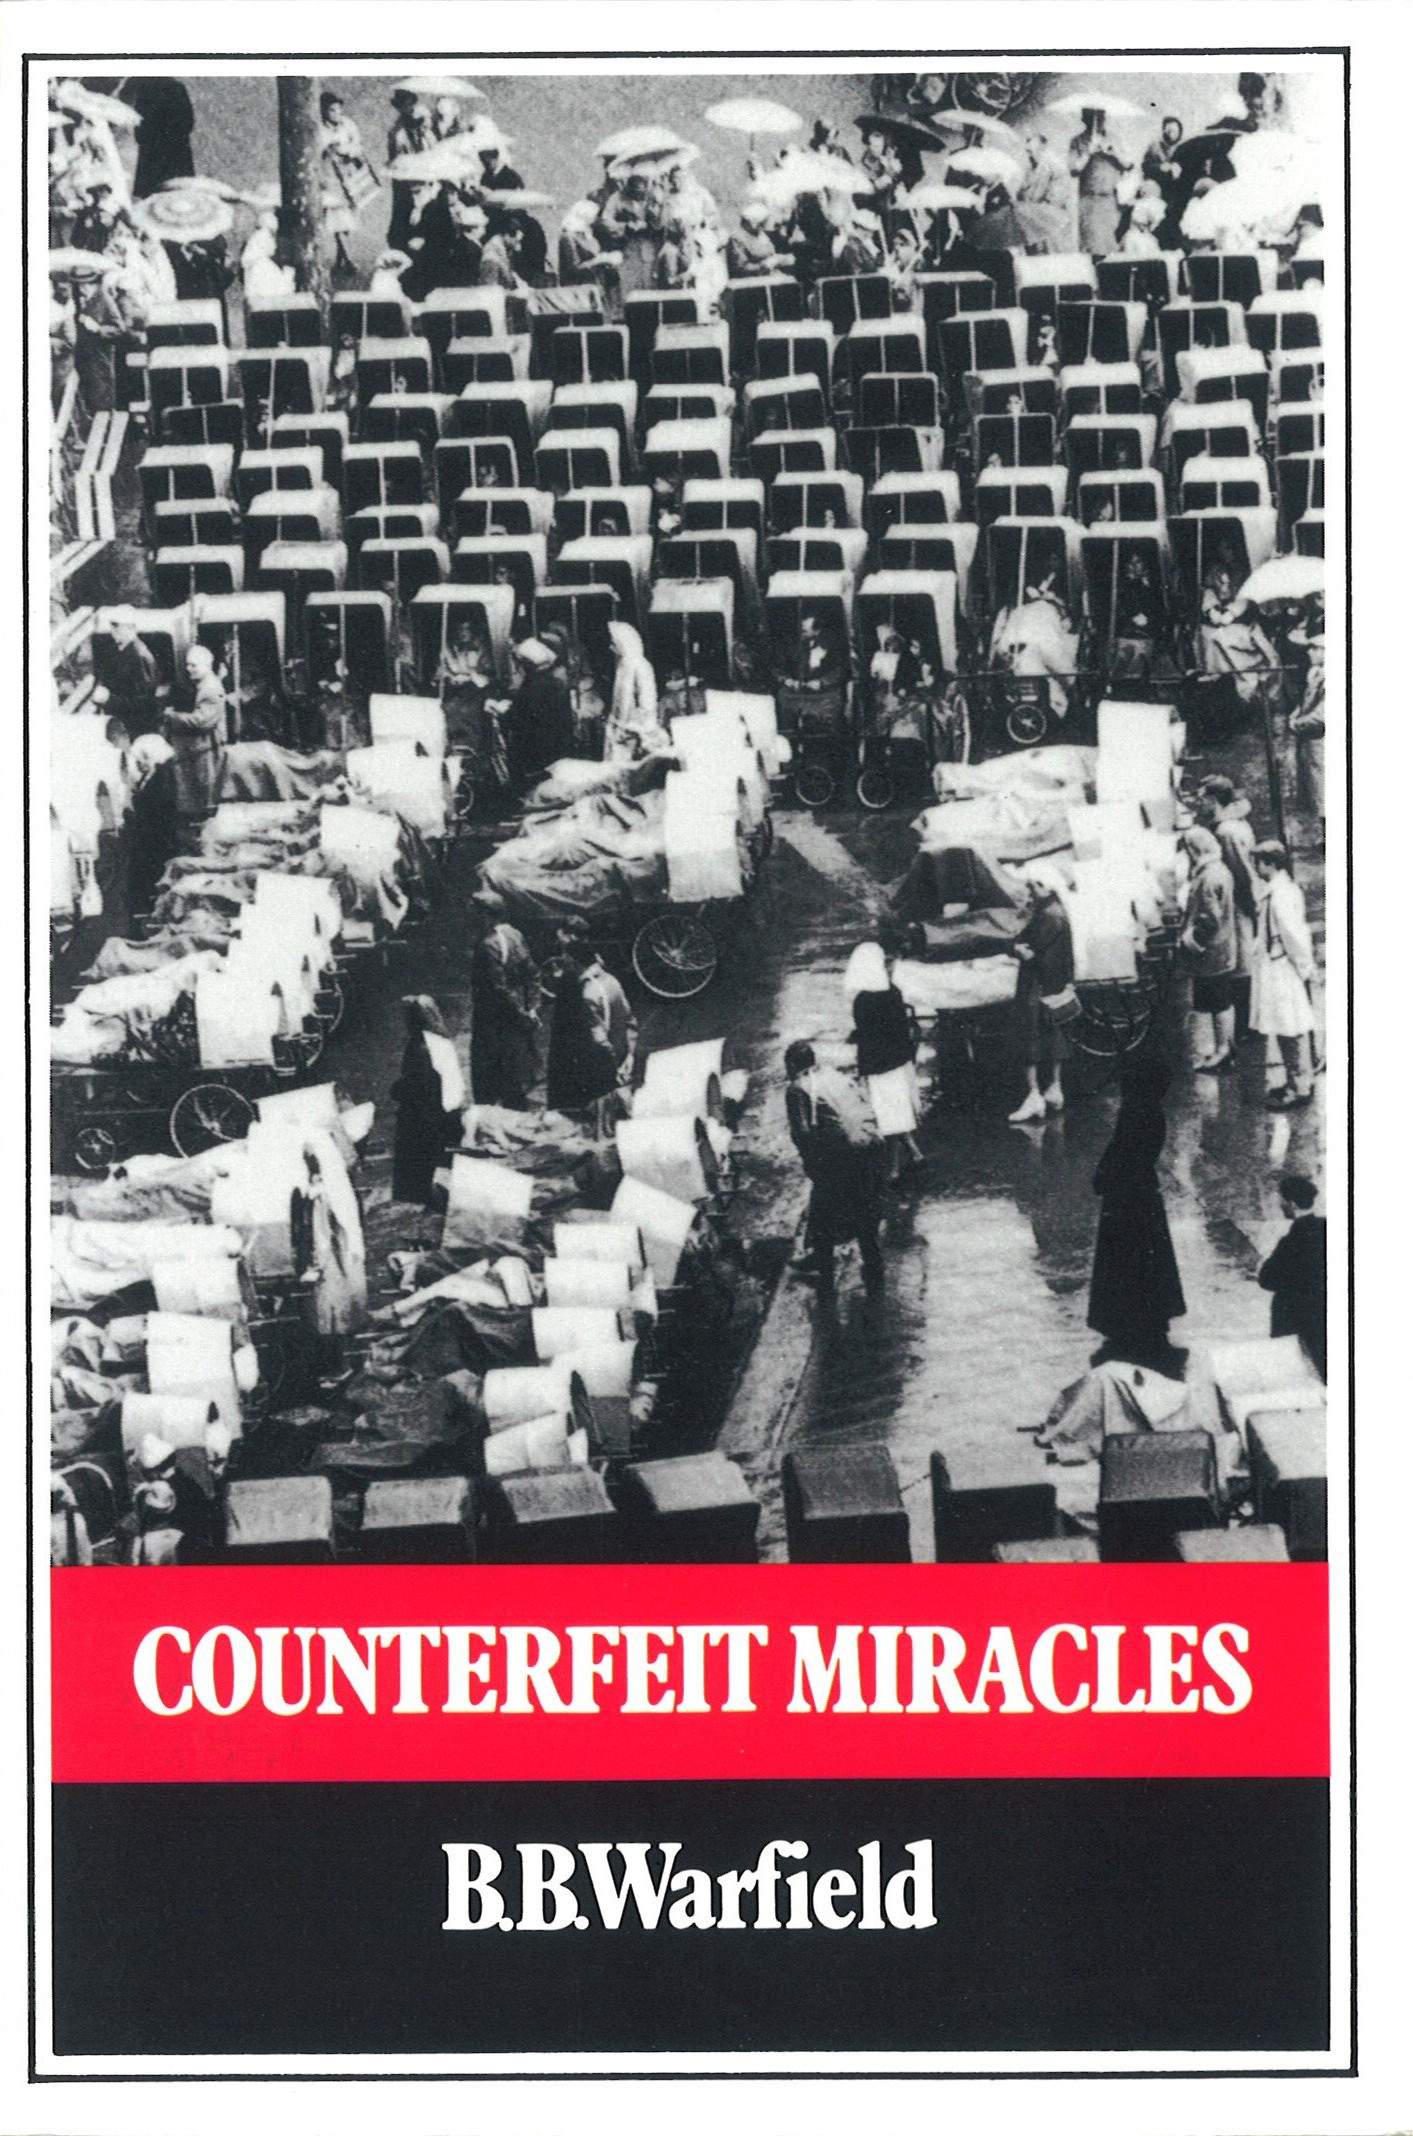 Book Cover For 'Counterfeit Miracles'